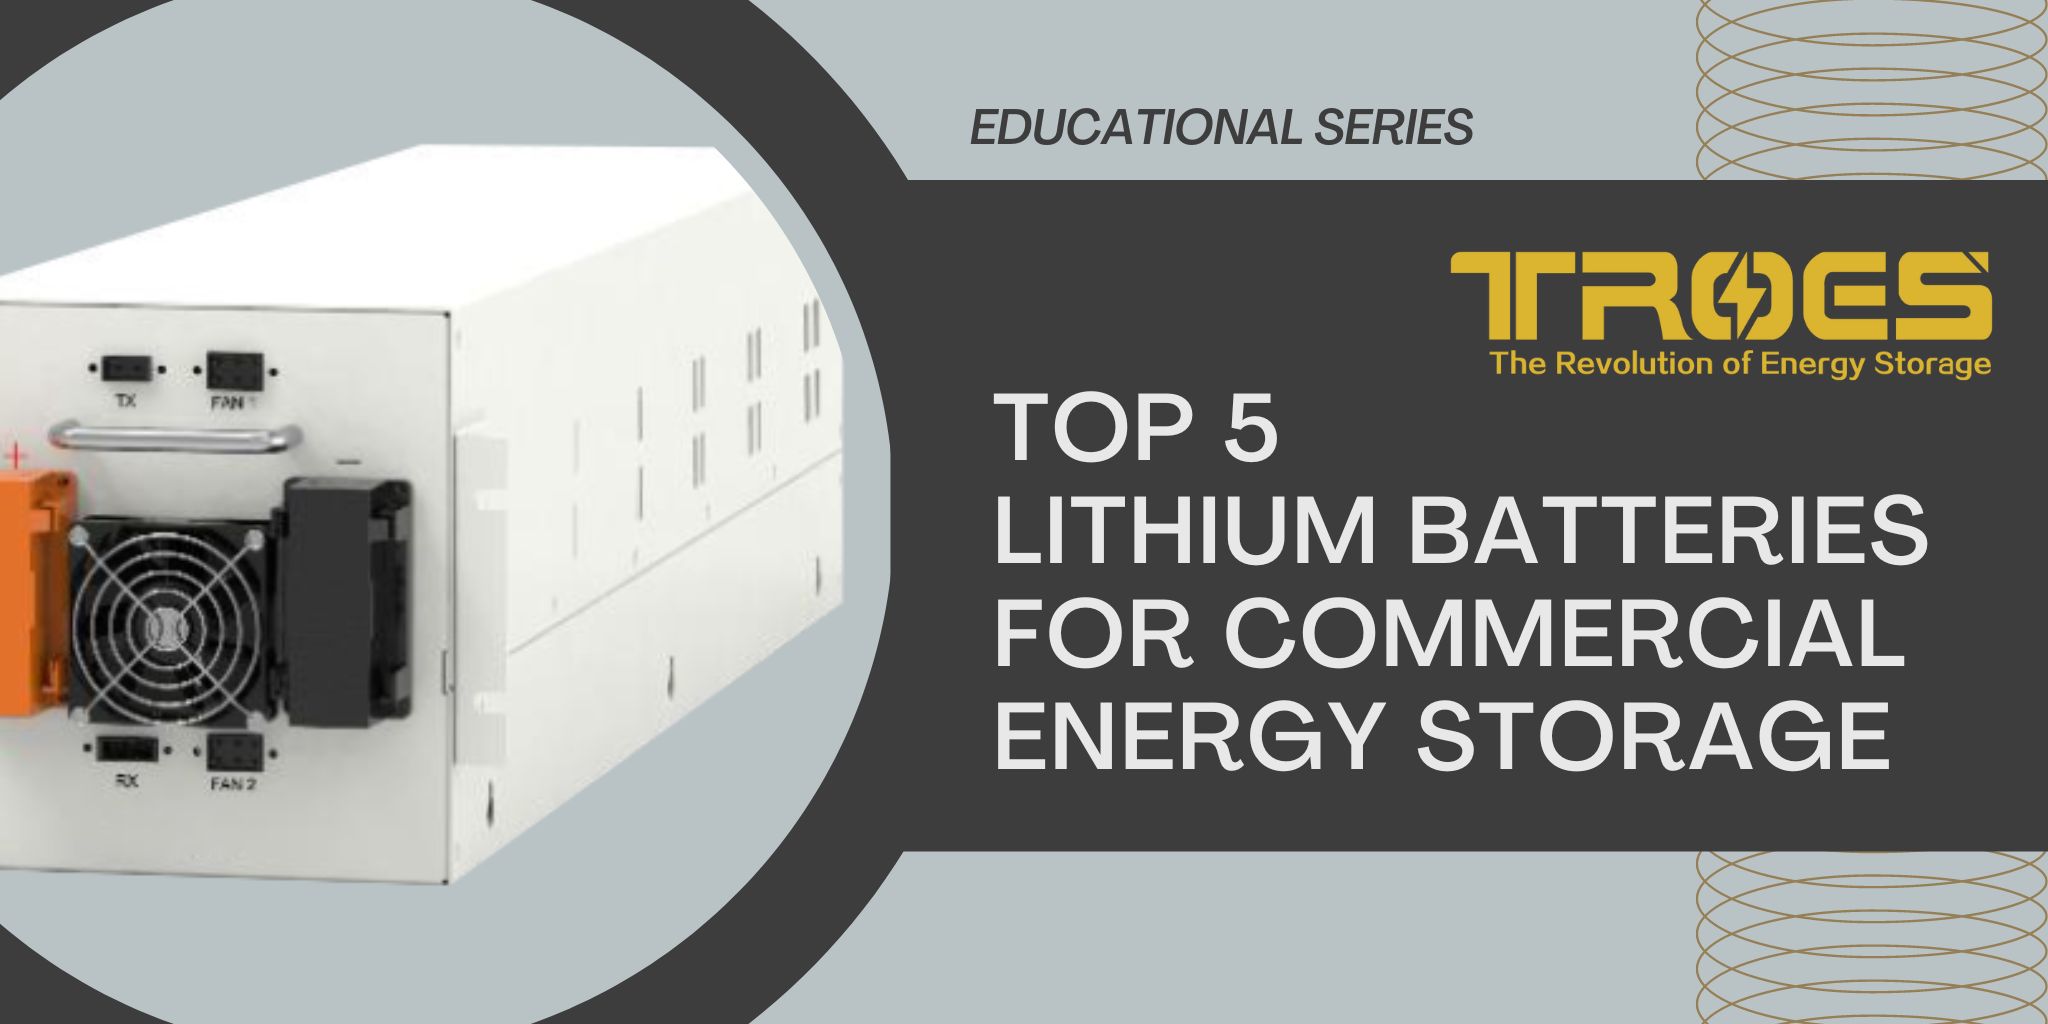 Top 5 Lithium Batteries for Commercial ES Header